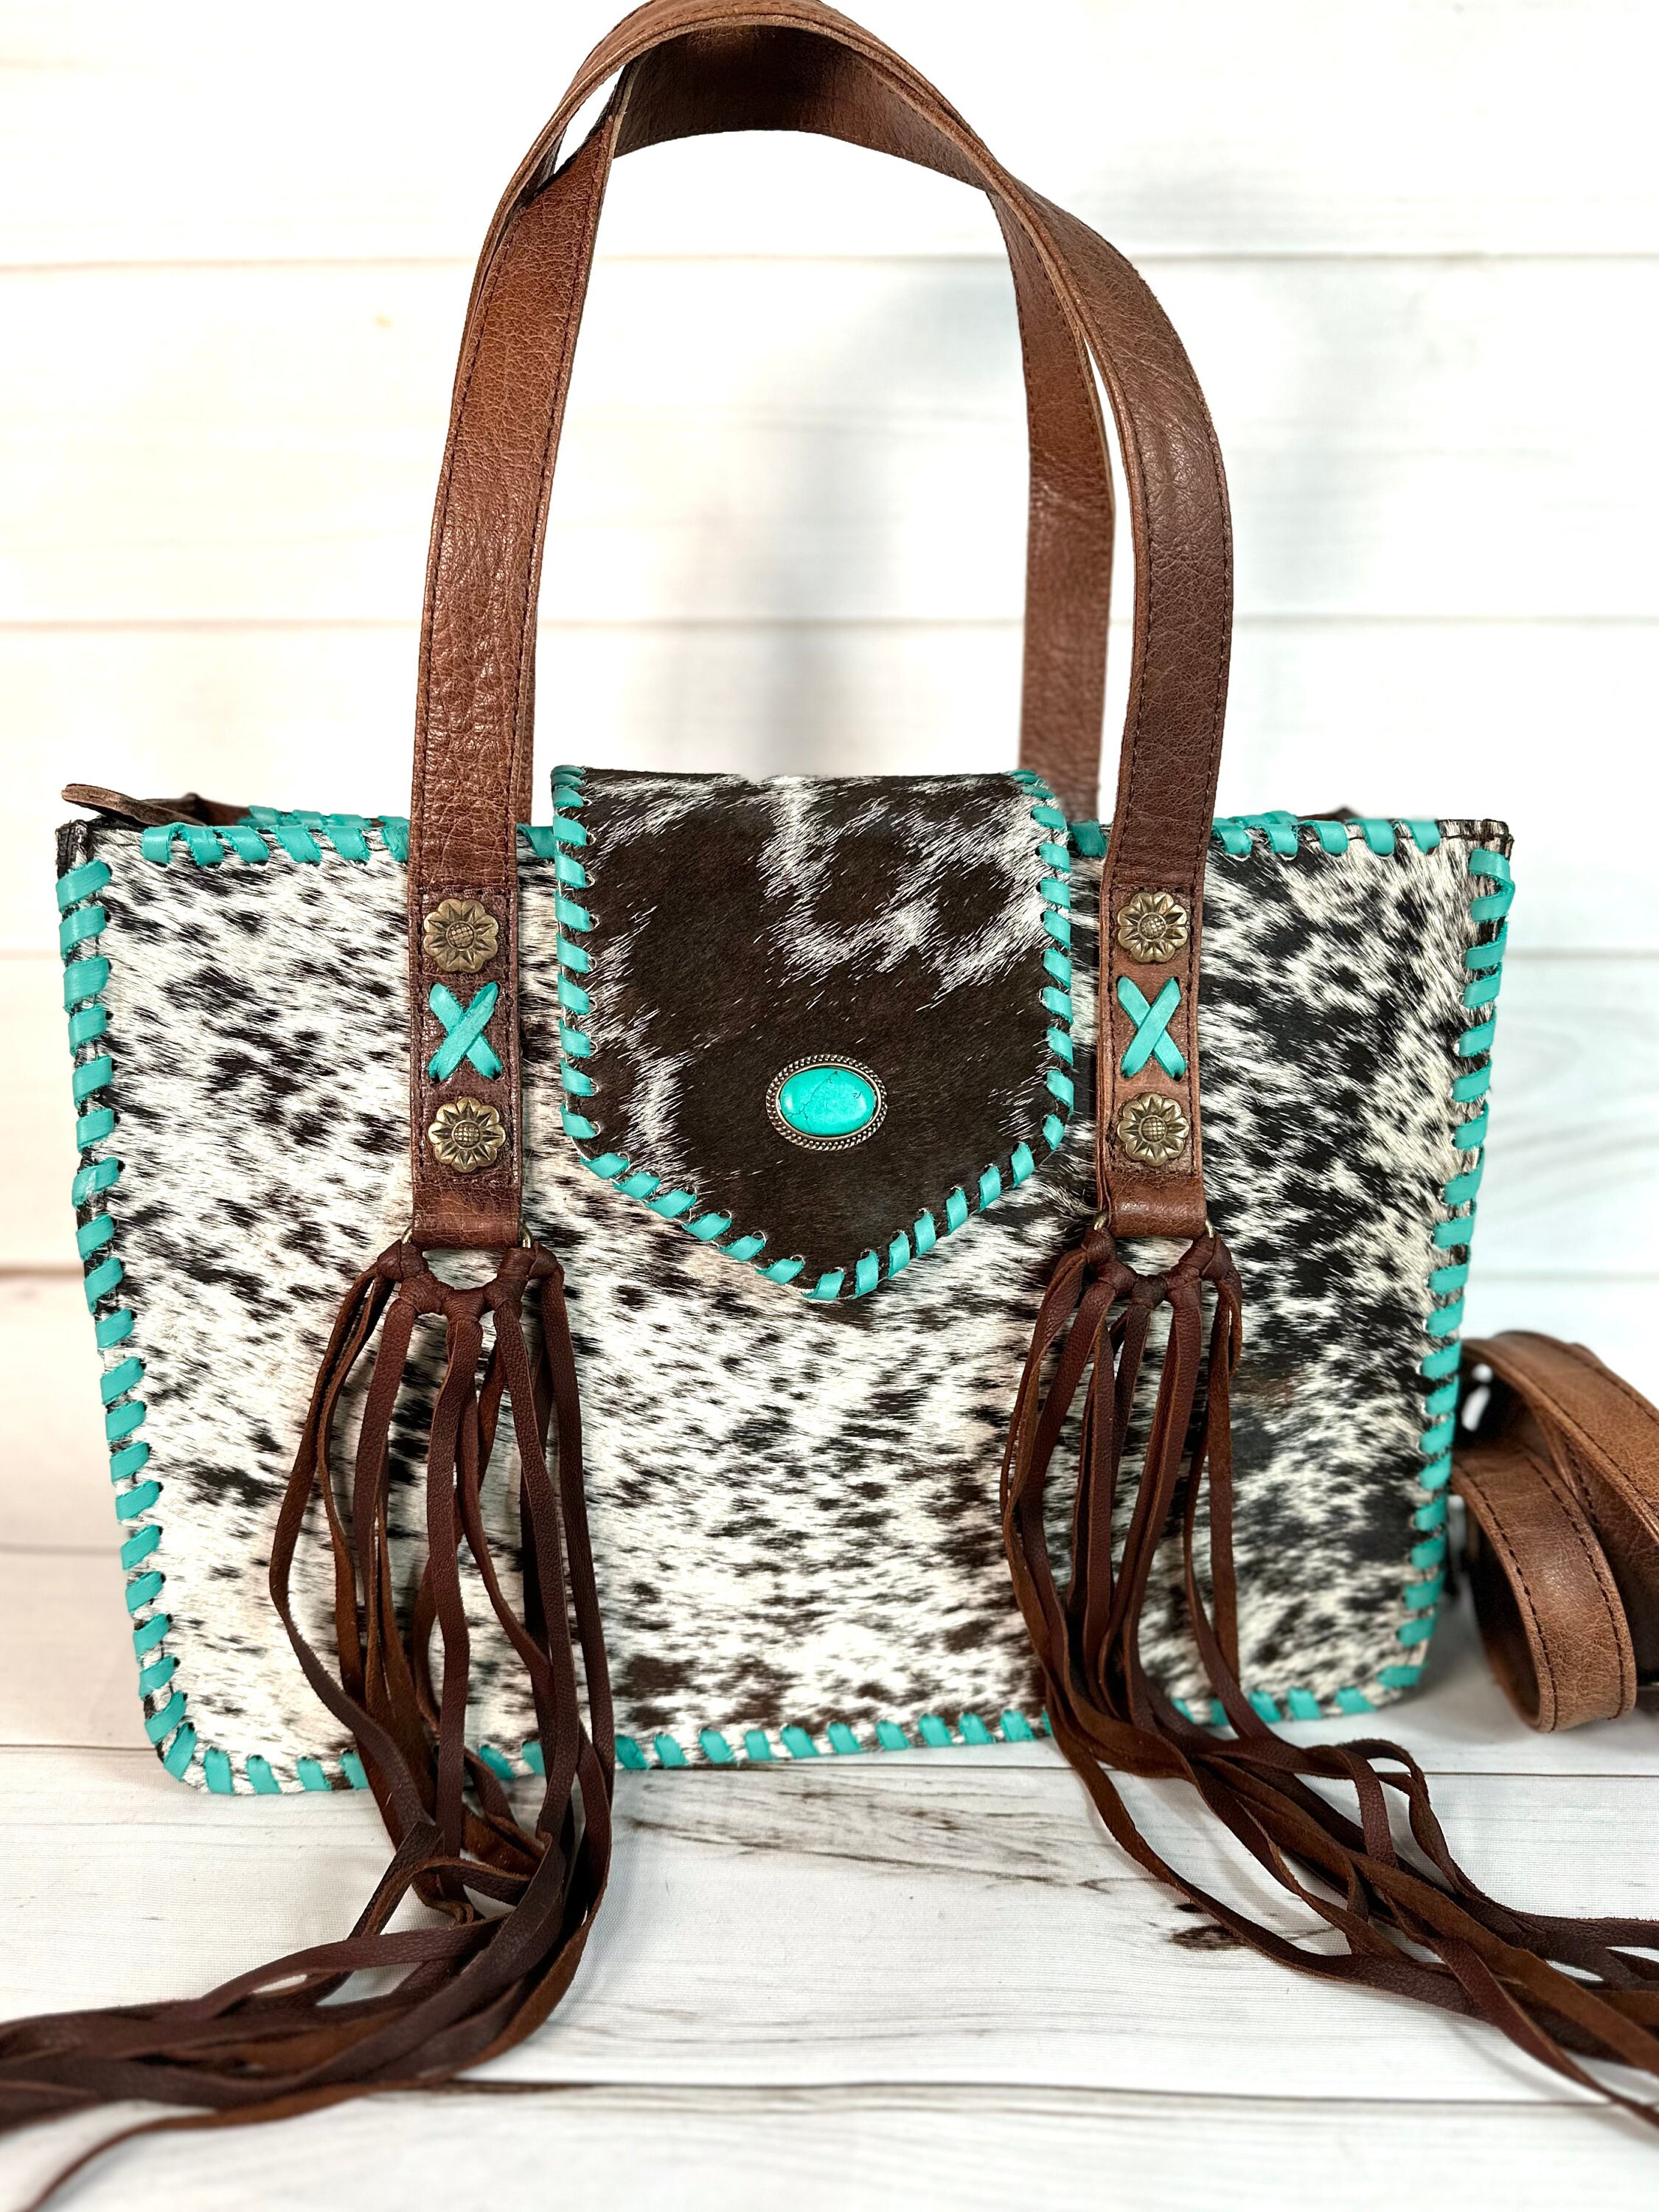 The Original Hide Bags: Turquoise and Western Fashion – Holy Cow